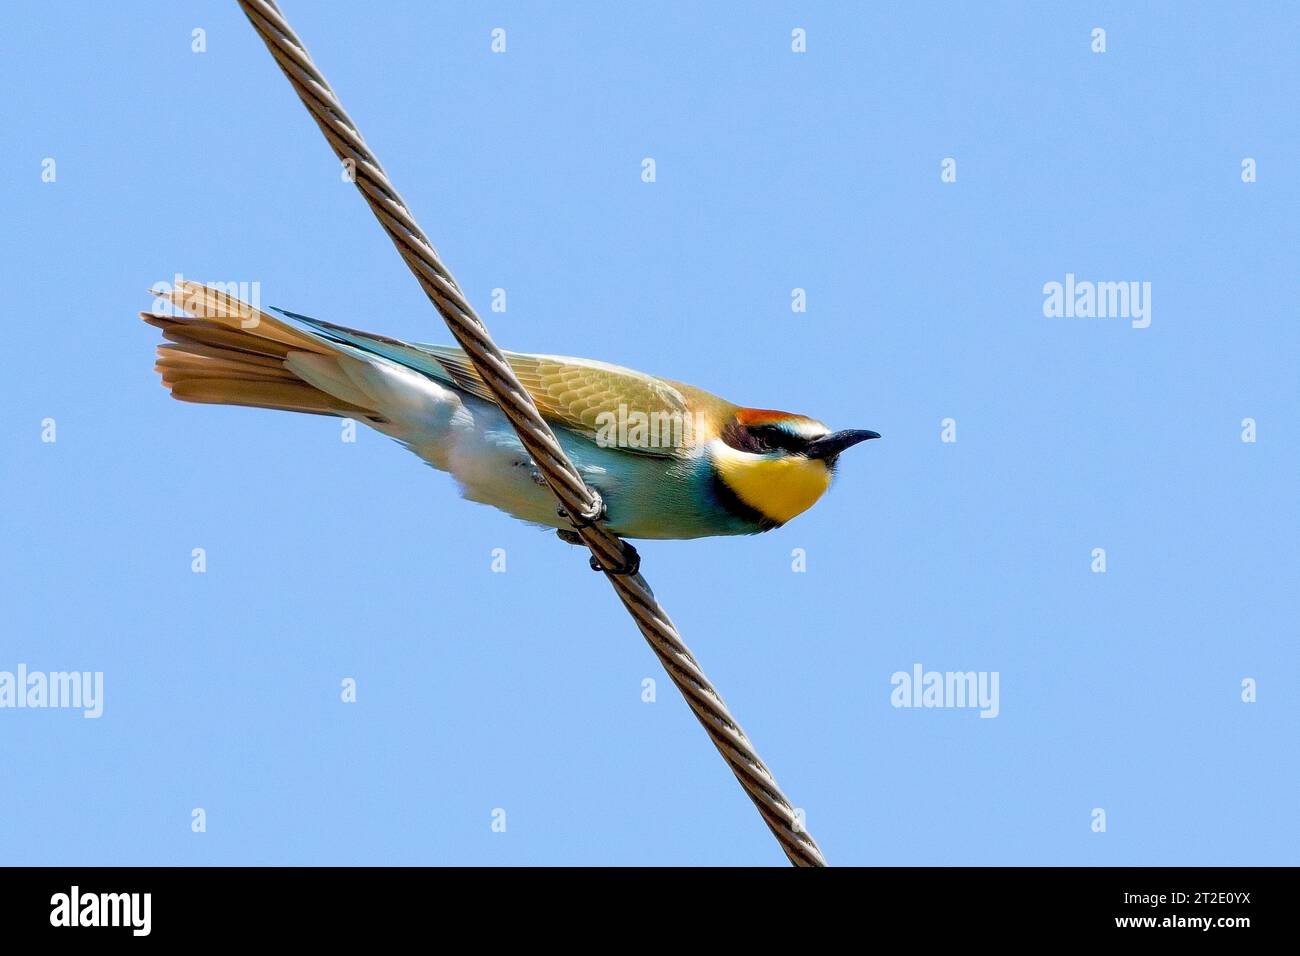 European Bee-eater (Merops apiaster) perched on an overhead wire, preparing to take-off, near Venaco, Corsica, France. Stock Photo